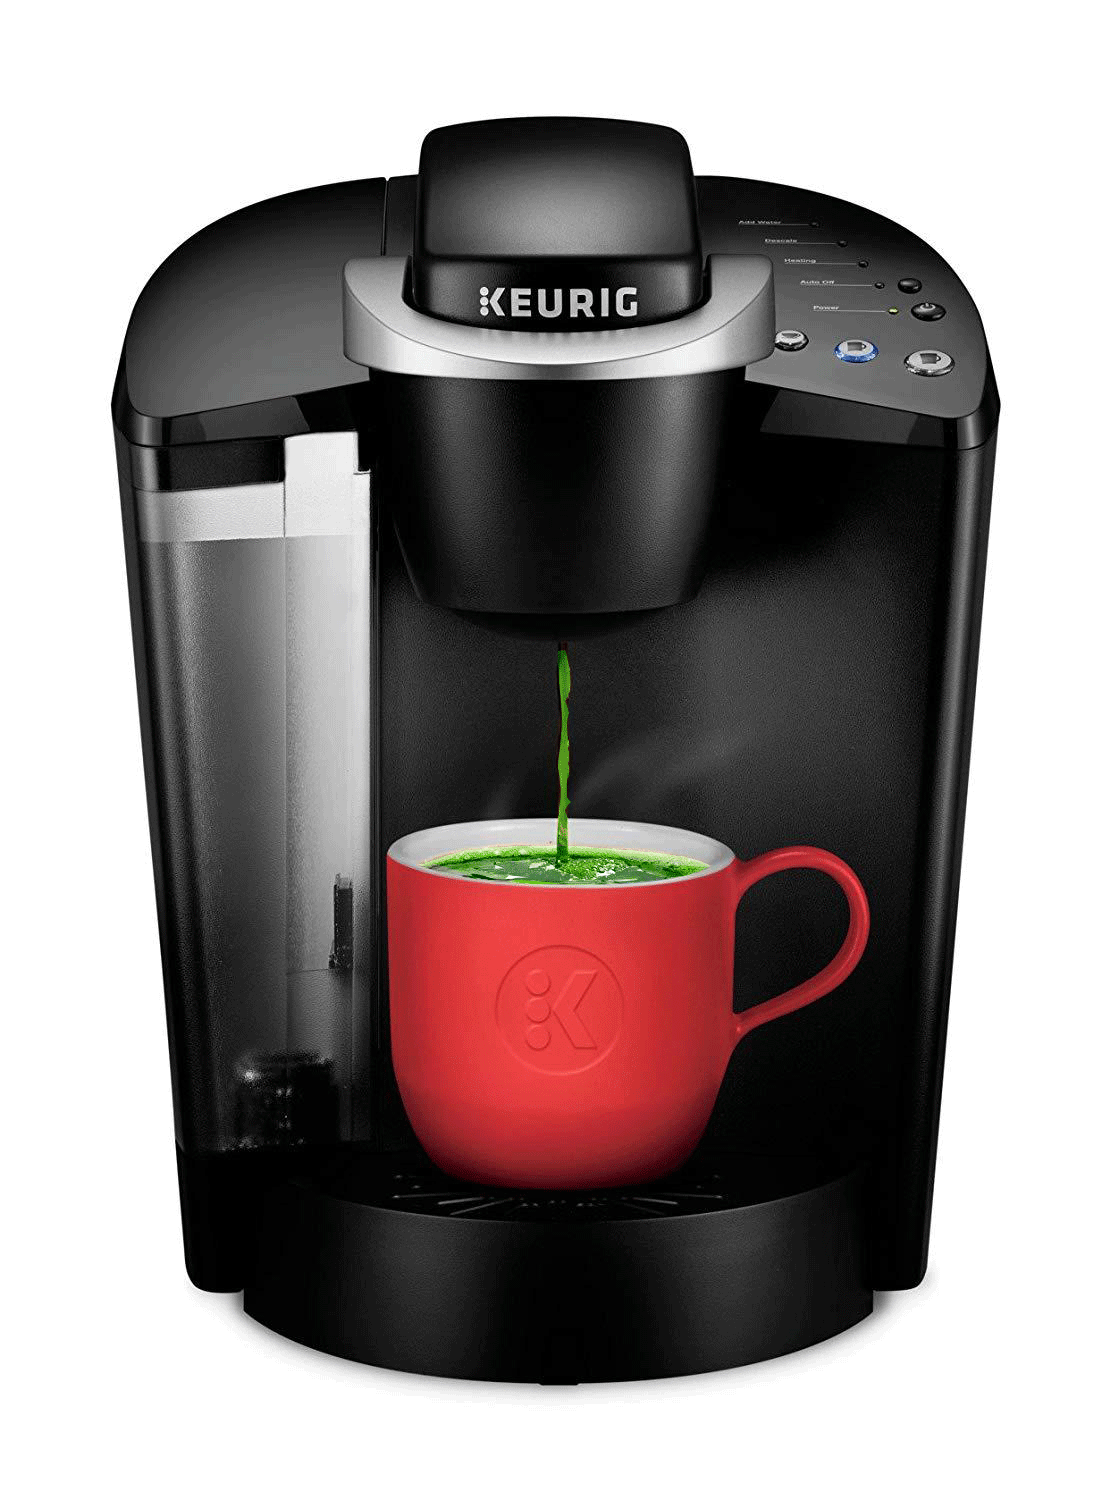 you can use the Keurig to brew tasty green tea